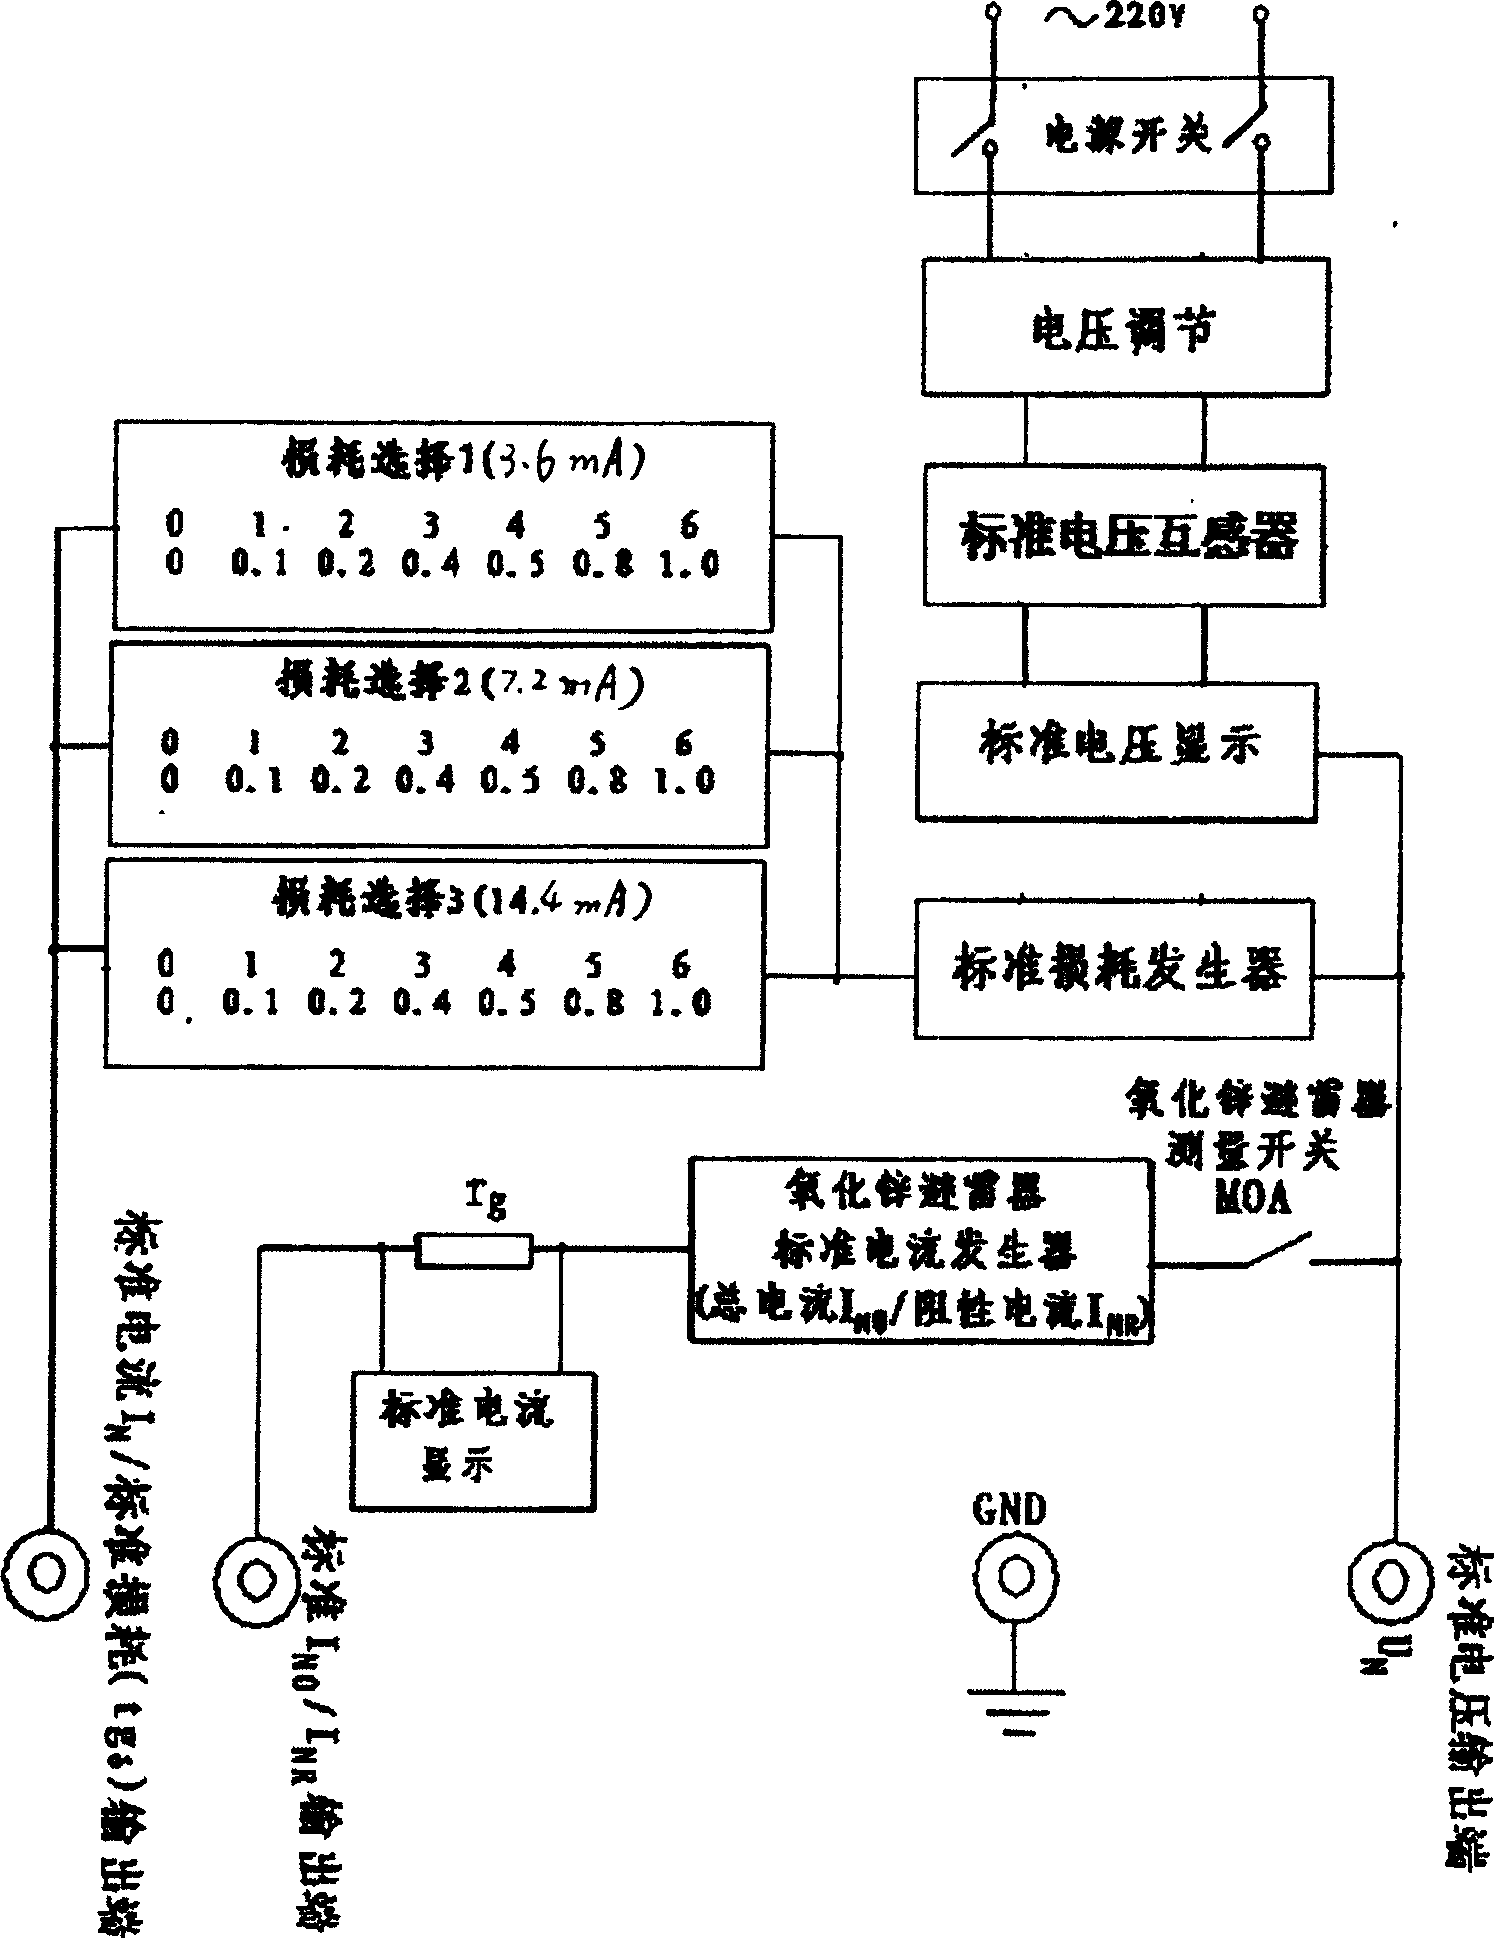 Insulated on-line monitoring system checker of high-voltage electric equipment